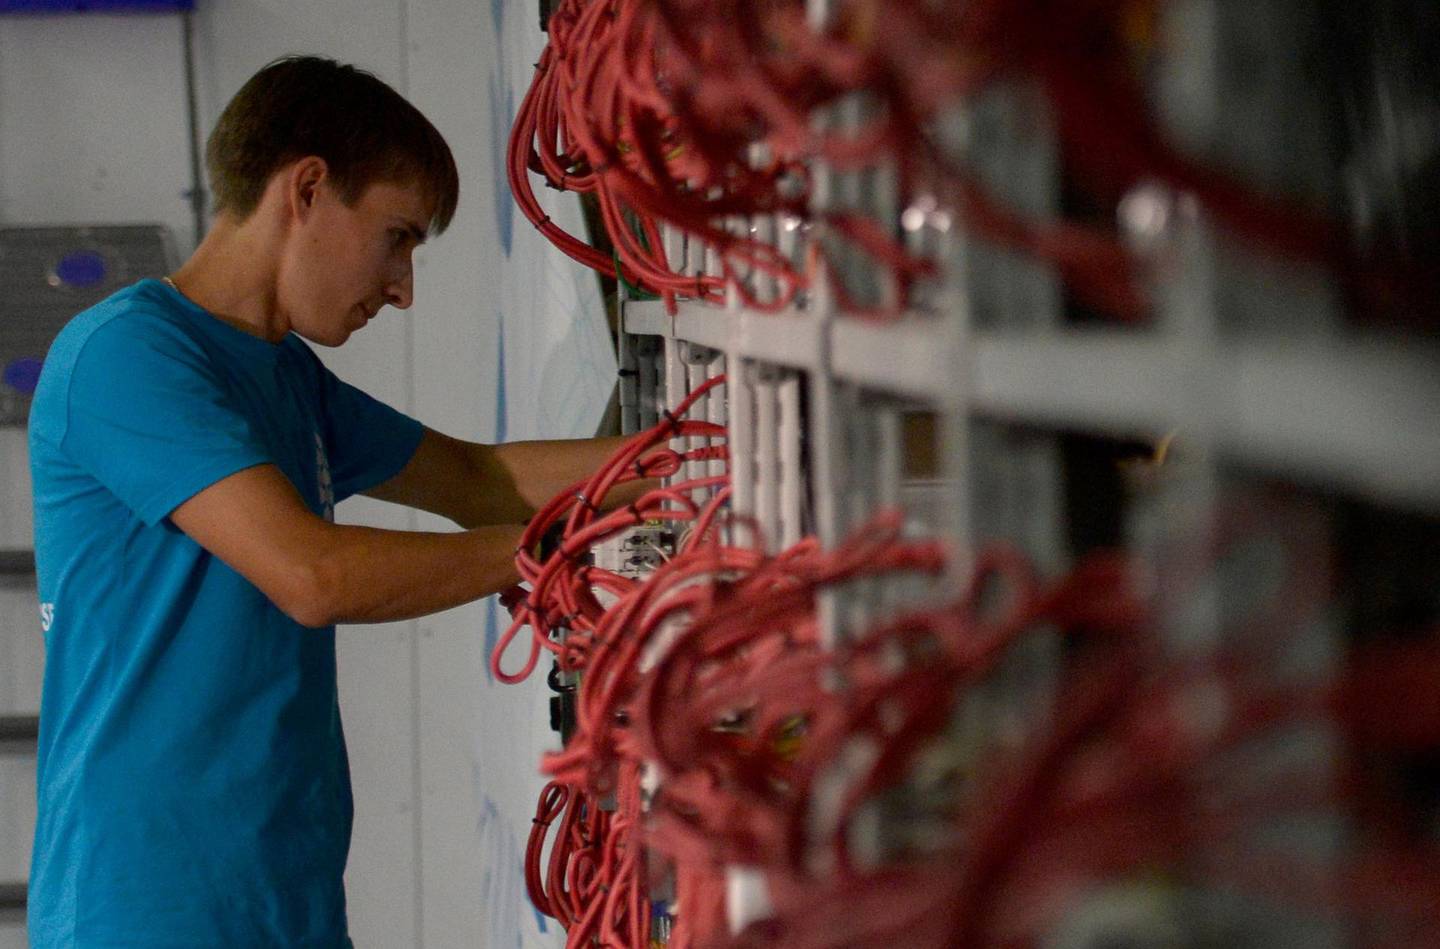 An employee inspects machines for the production of bitcoins and lightcoins at the "CryptoJuniversóe" mining centre during a presentation of the centre for the crypto currency in Kirishi on August 20, 2018. - A Russian company opened on August 20, 2018 what it said was the country's largest cryptocurrency mining unit, in a former Soviet fertilizer-producing laboratory. The opening comes as Russian authorities seek to regulate the booming cryptocurrency sector. Russia is in third place after China and the United States in the ranks of cryptocurrency-producing nations since 2015, according to a study published at the end of last year by Ernst & Young. (Photo by OLGA MALTSEVA / AFP)